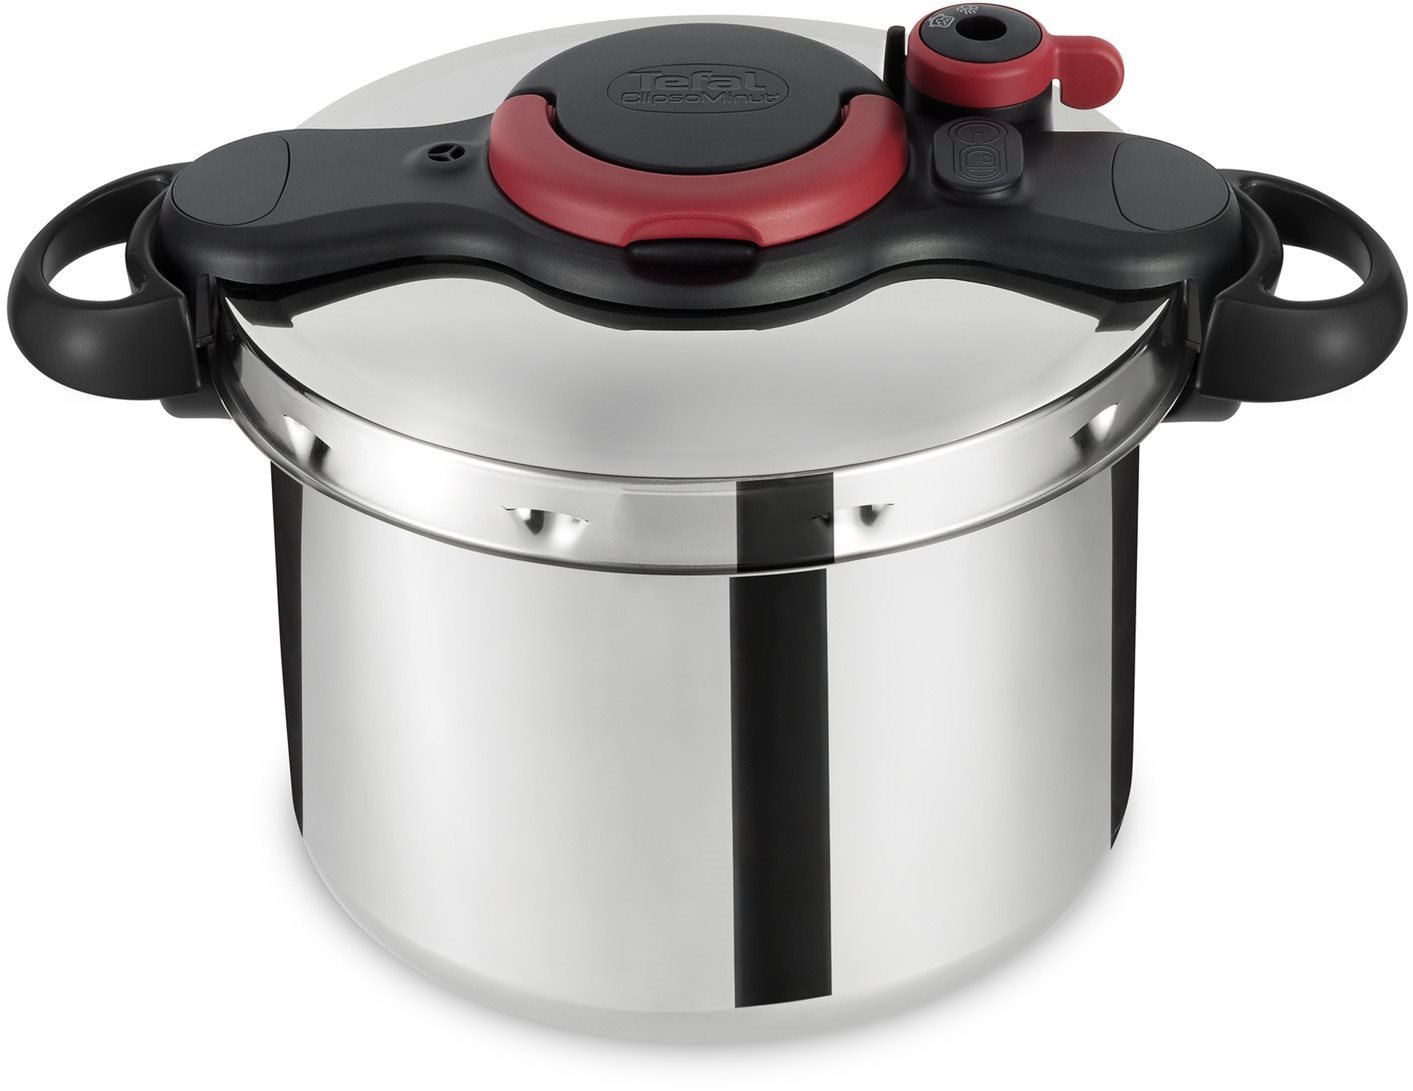 P4624967 CLIPSO MINUTE EASY 9L TEFAL